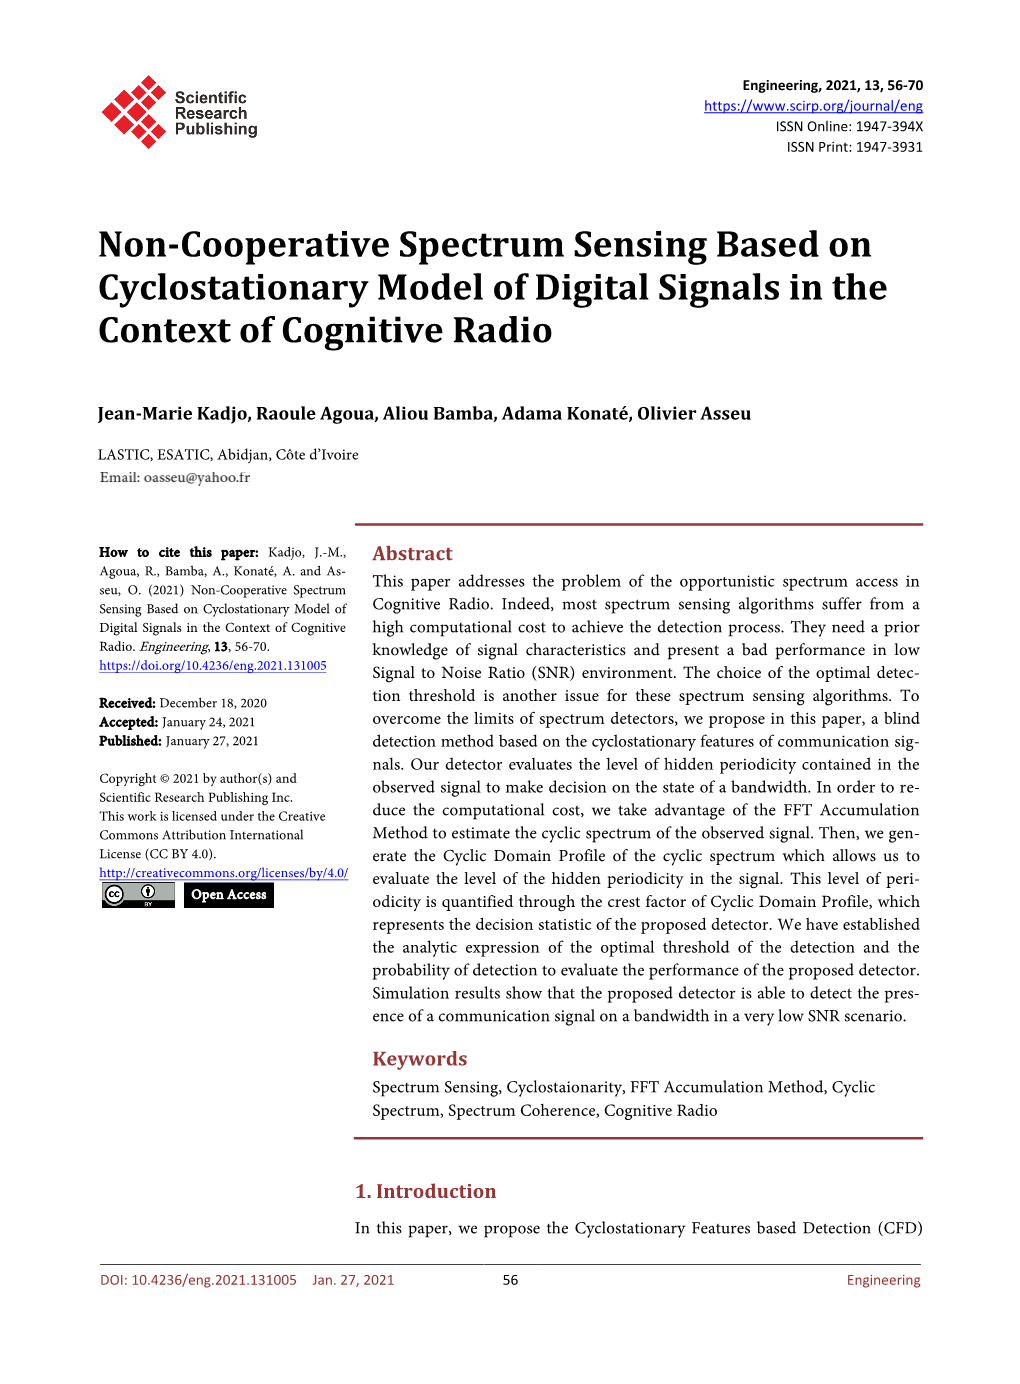 Non-Cooperative Spectrum Sensing Based on Cyclostationary Model of Digital Signals in the Context of Cognitive Radio